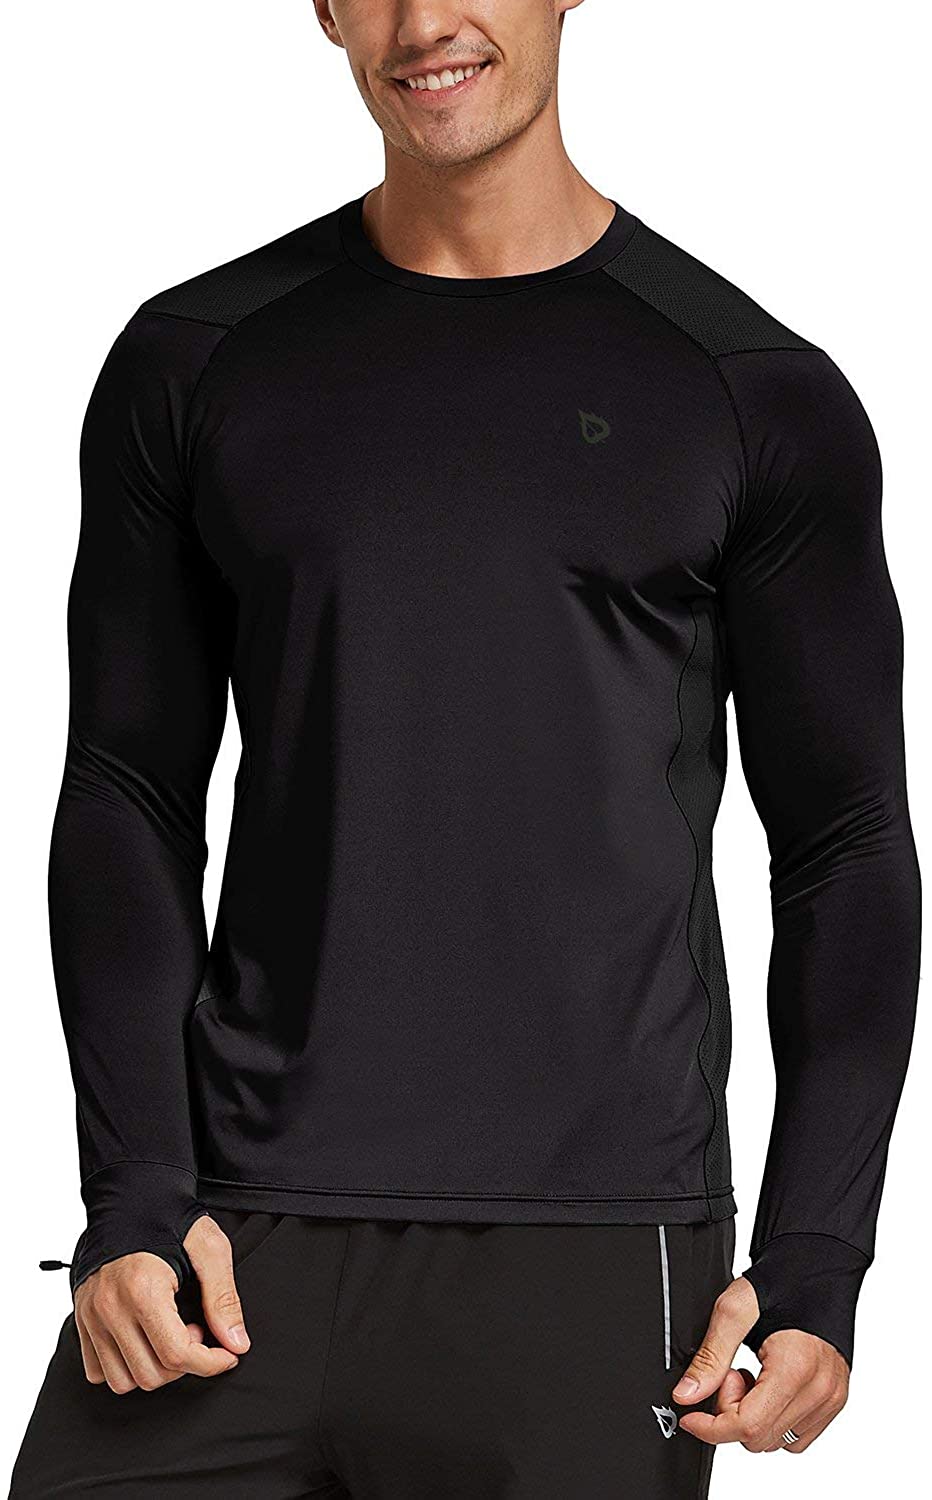 BALEAF Mens Athletic Long Sleeve Running Shirts Thumbholes Lightweight Workout T-Shirt Quick Dry Tops